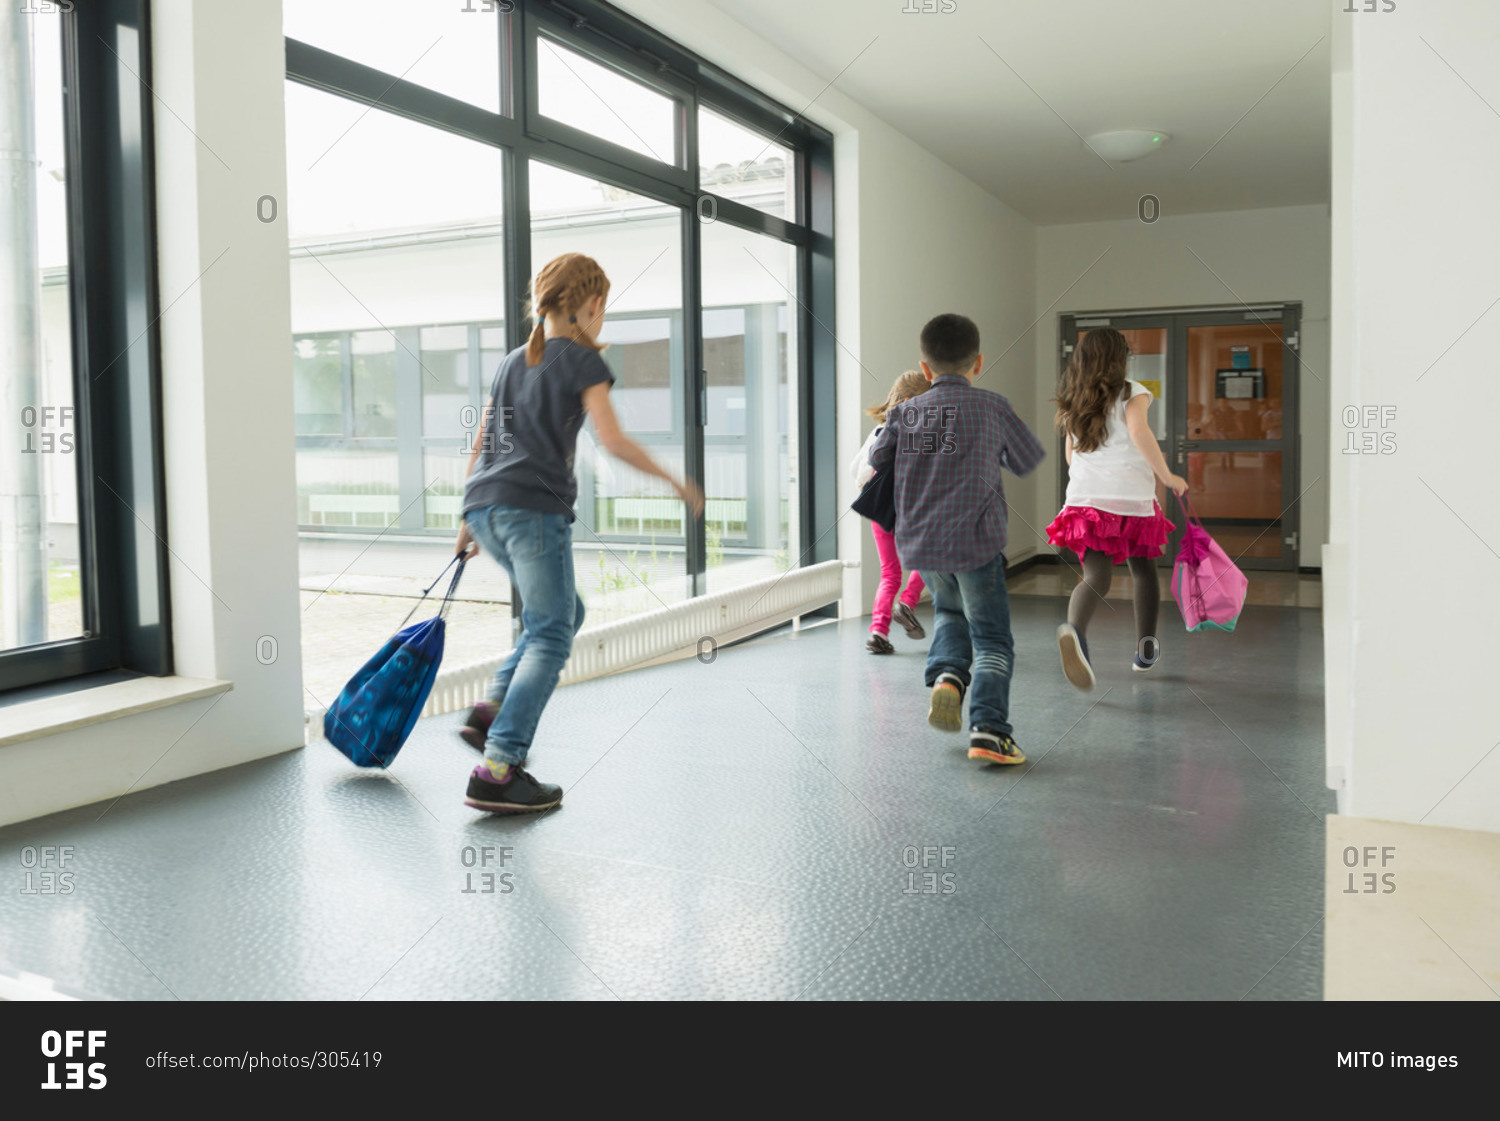 Children running with sports bags in corridor of sports hall, Munich, Bavaria, Germany